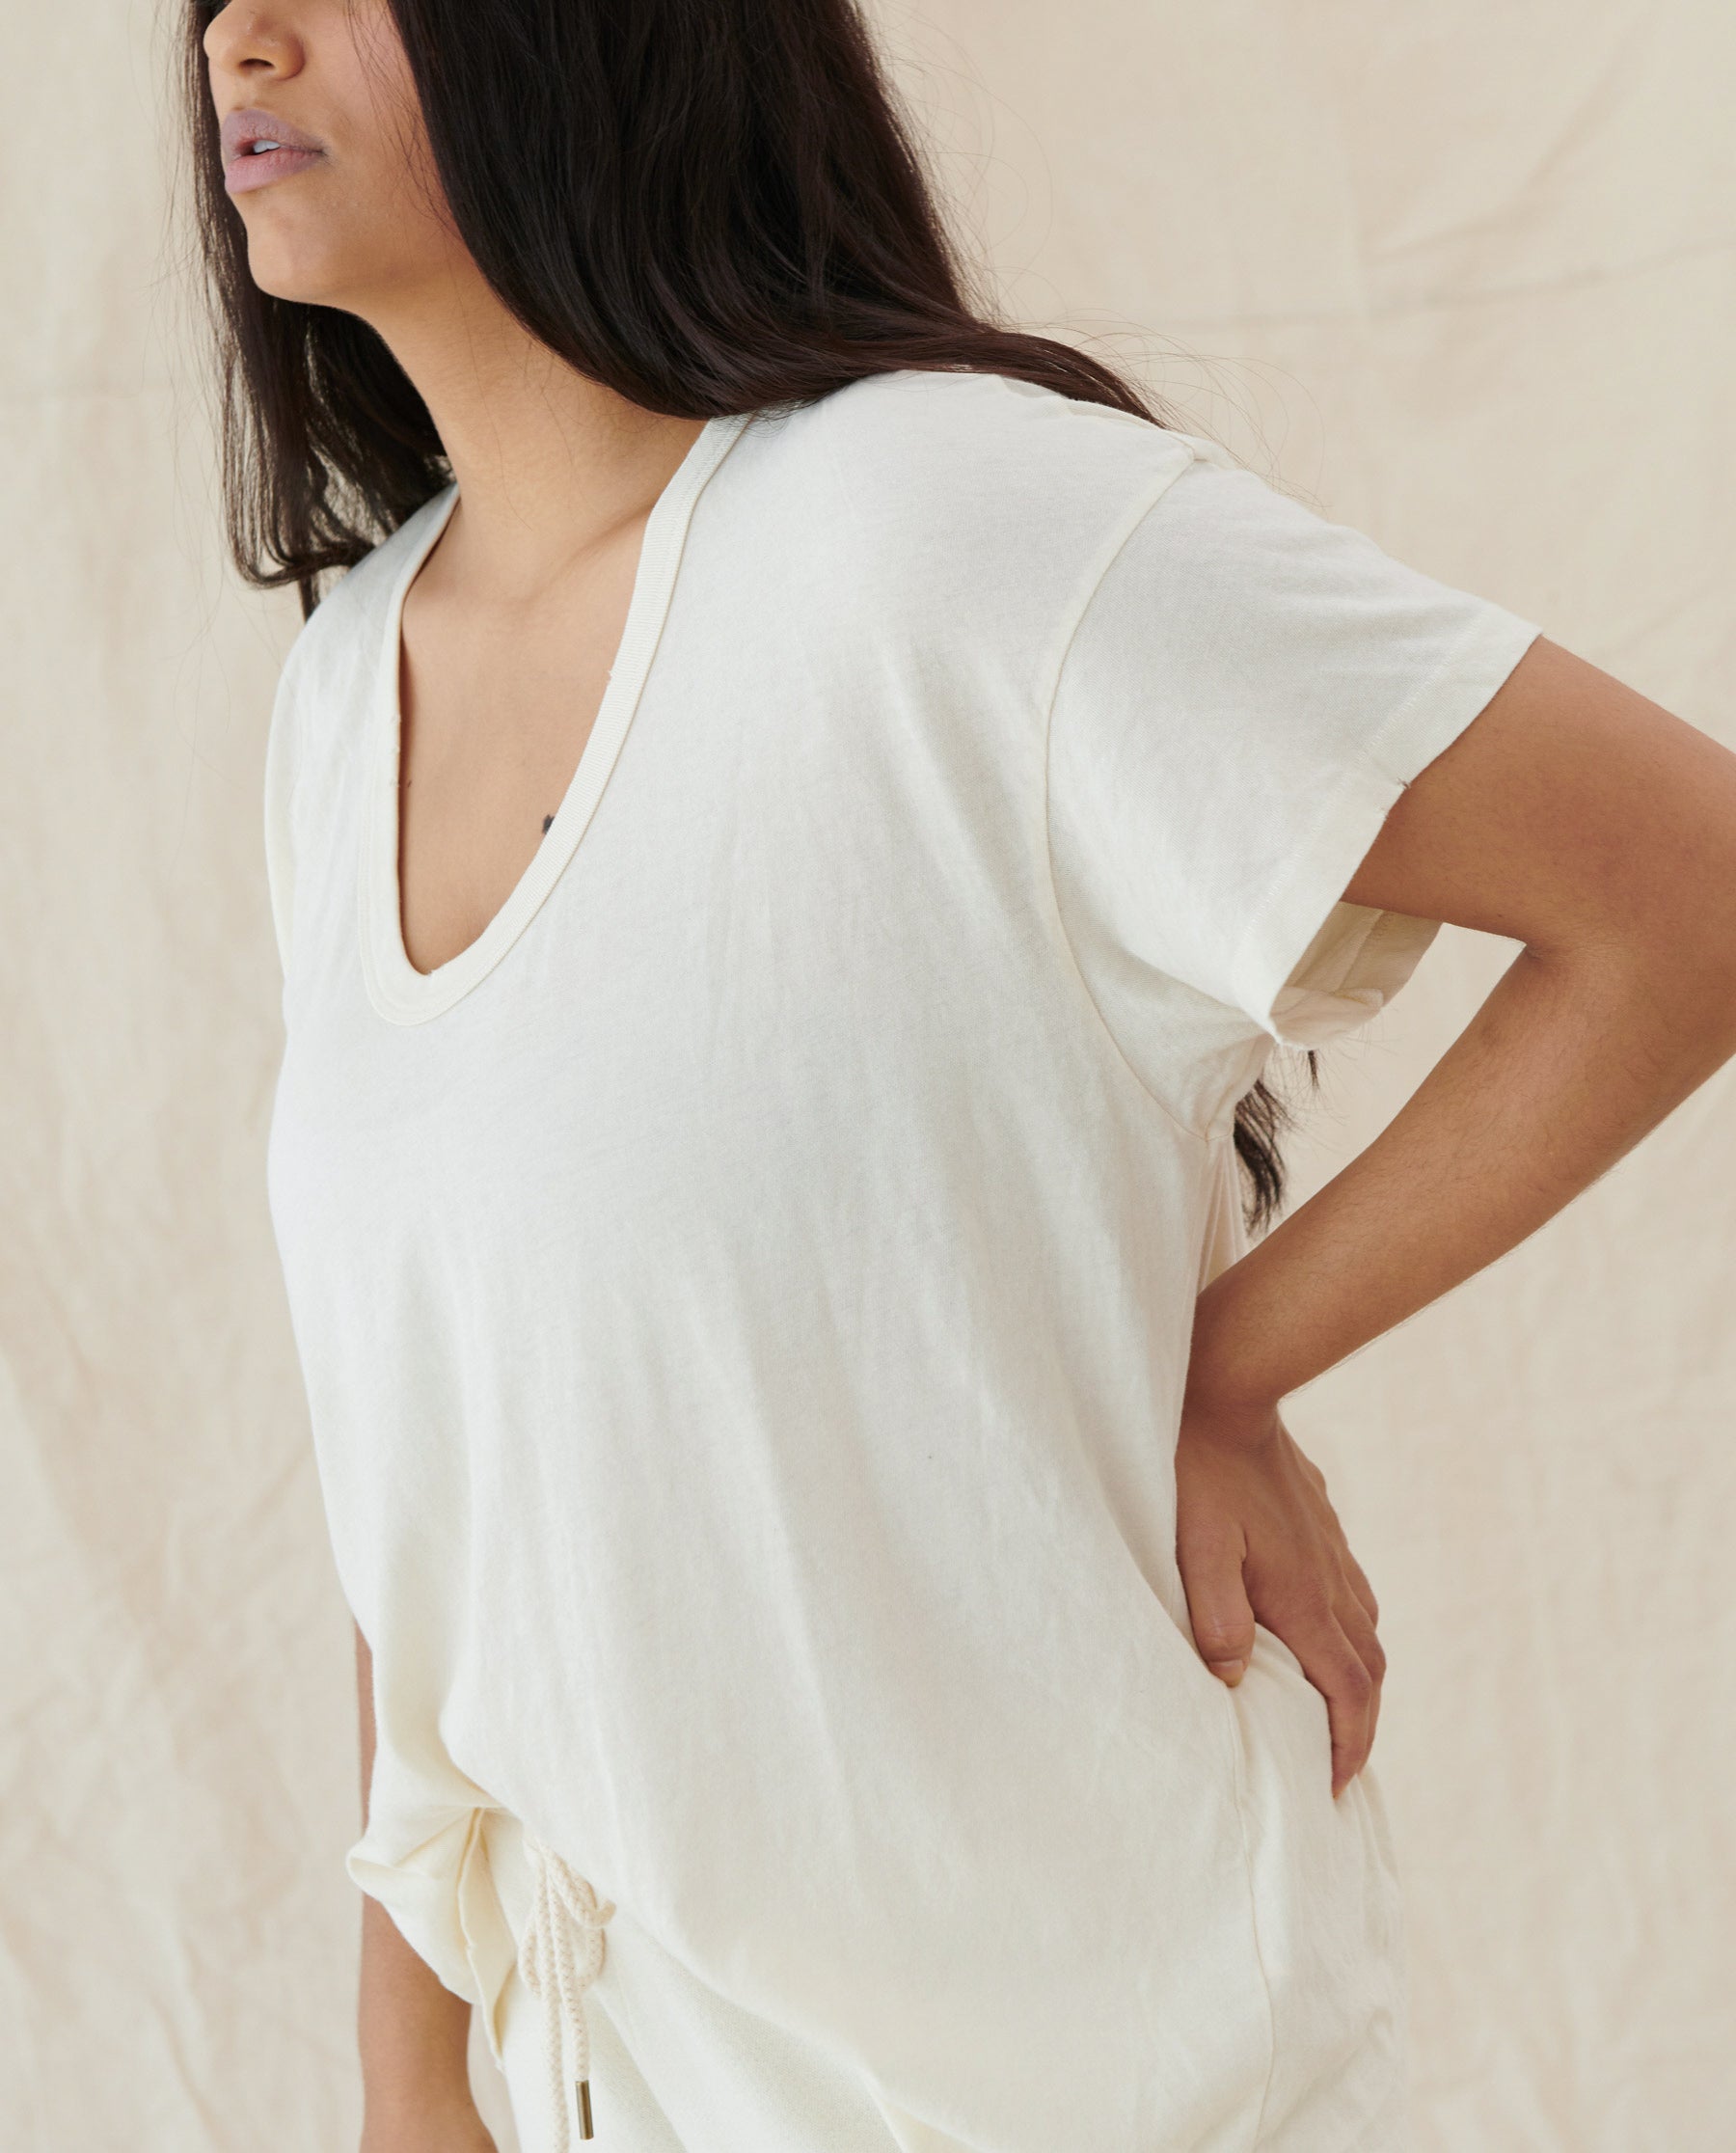 The U-Neck Tee. Solid -- Washed White